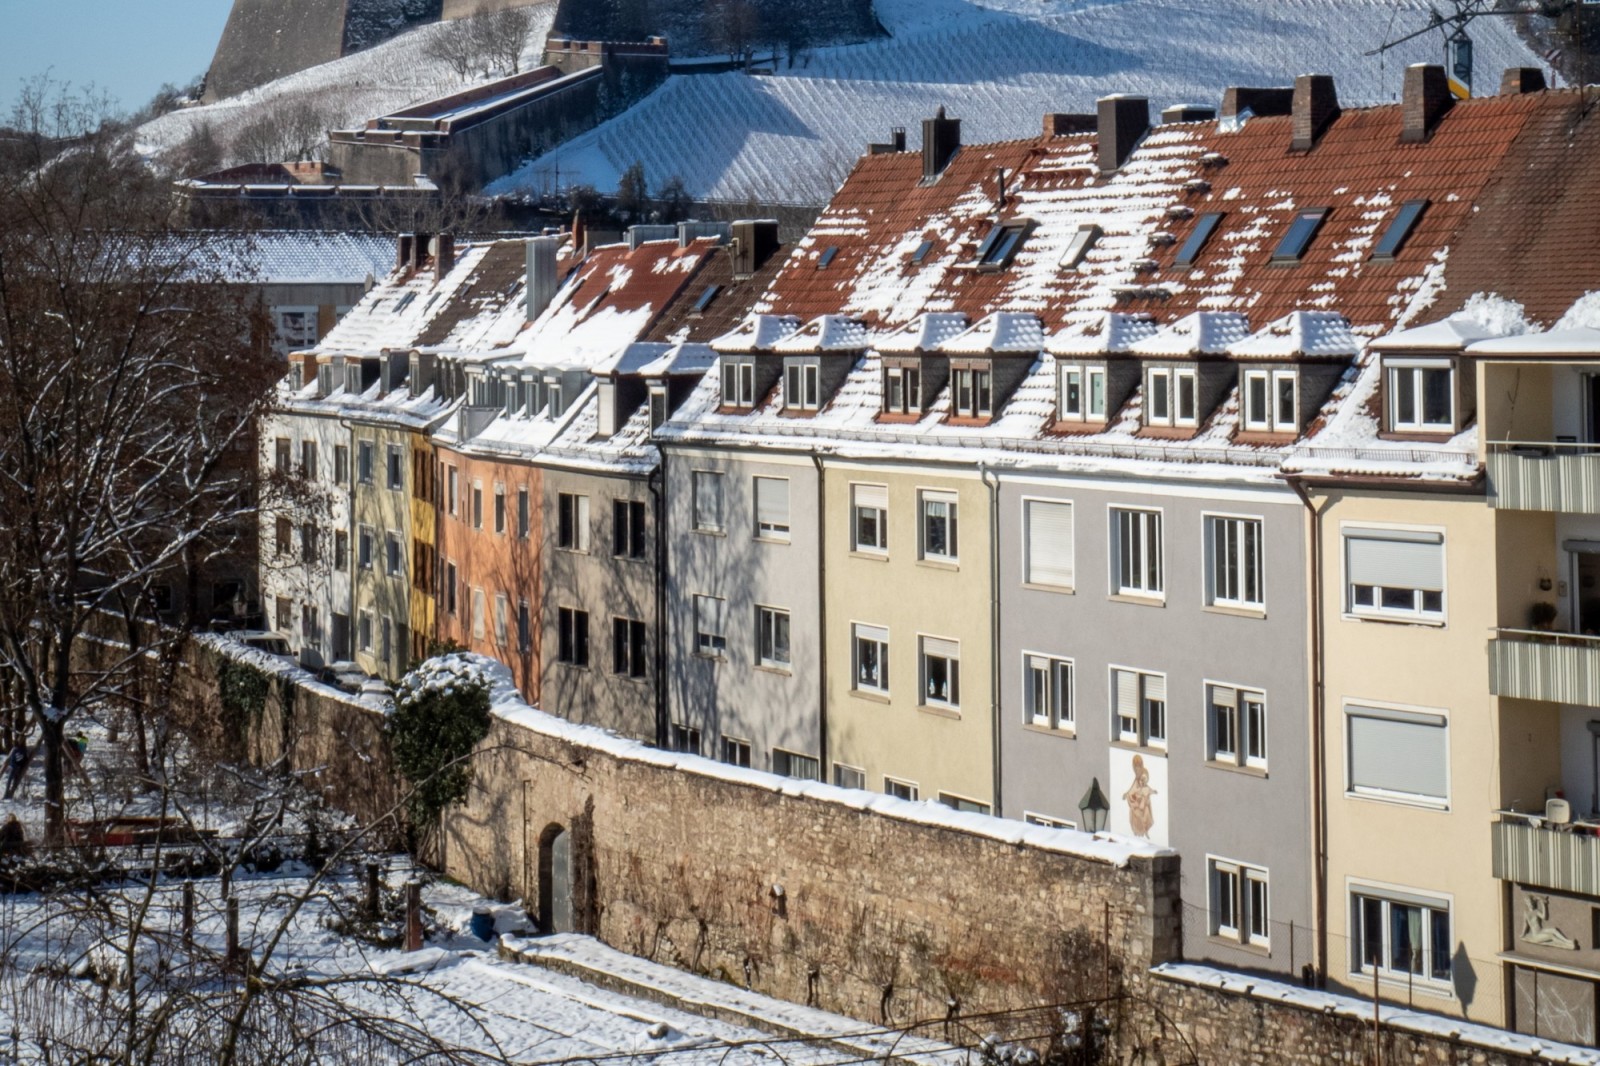 Buildings with snow covered roofs in Wurzburg, Germany.